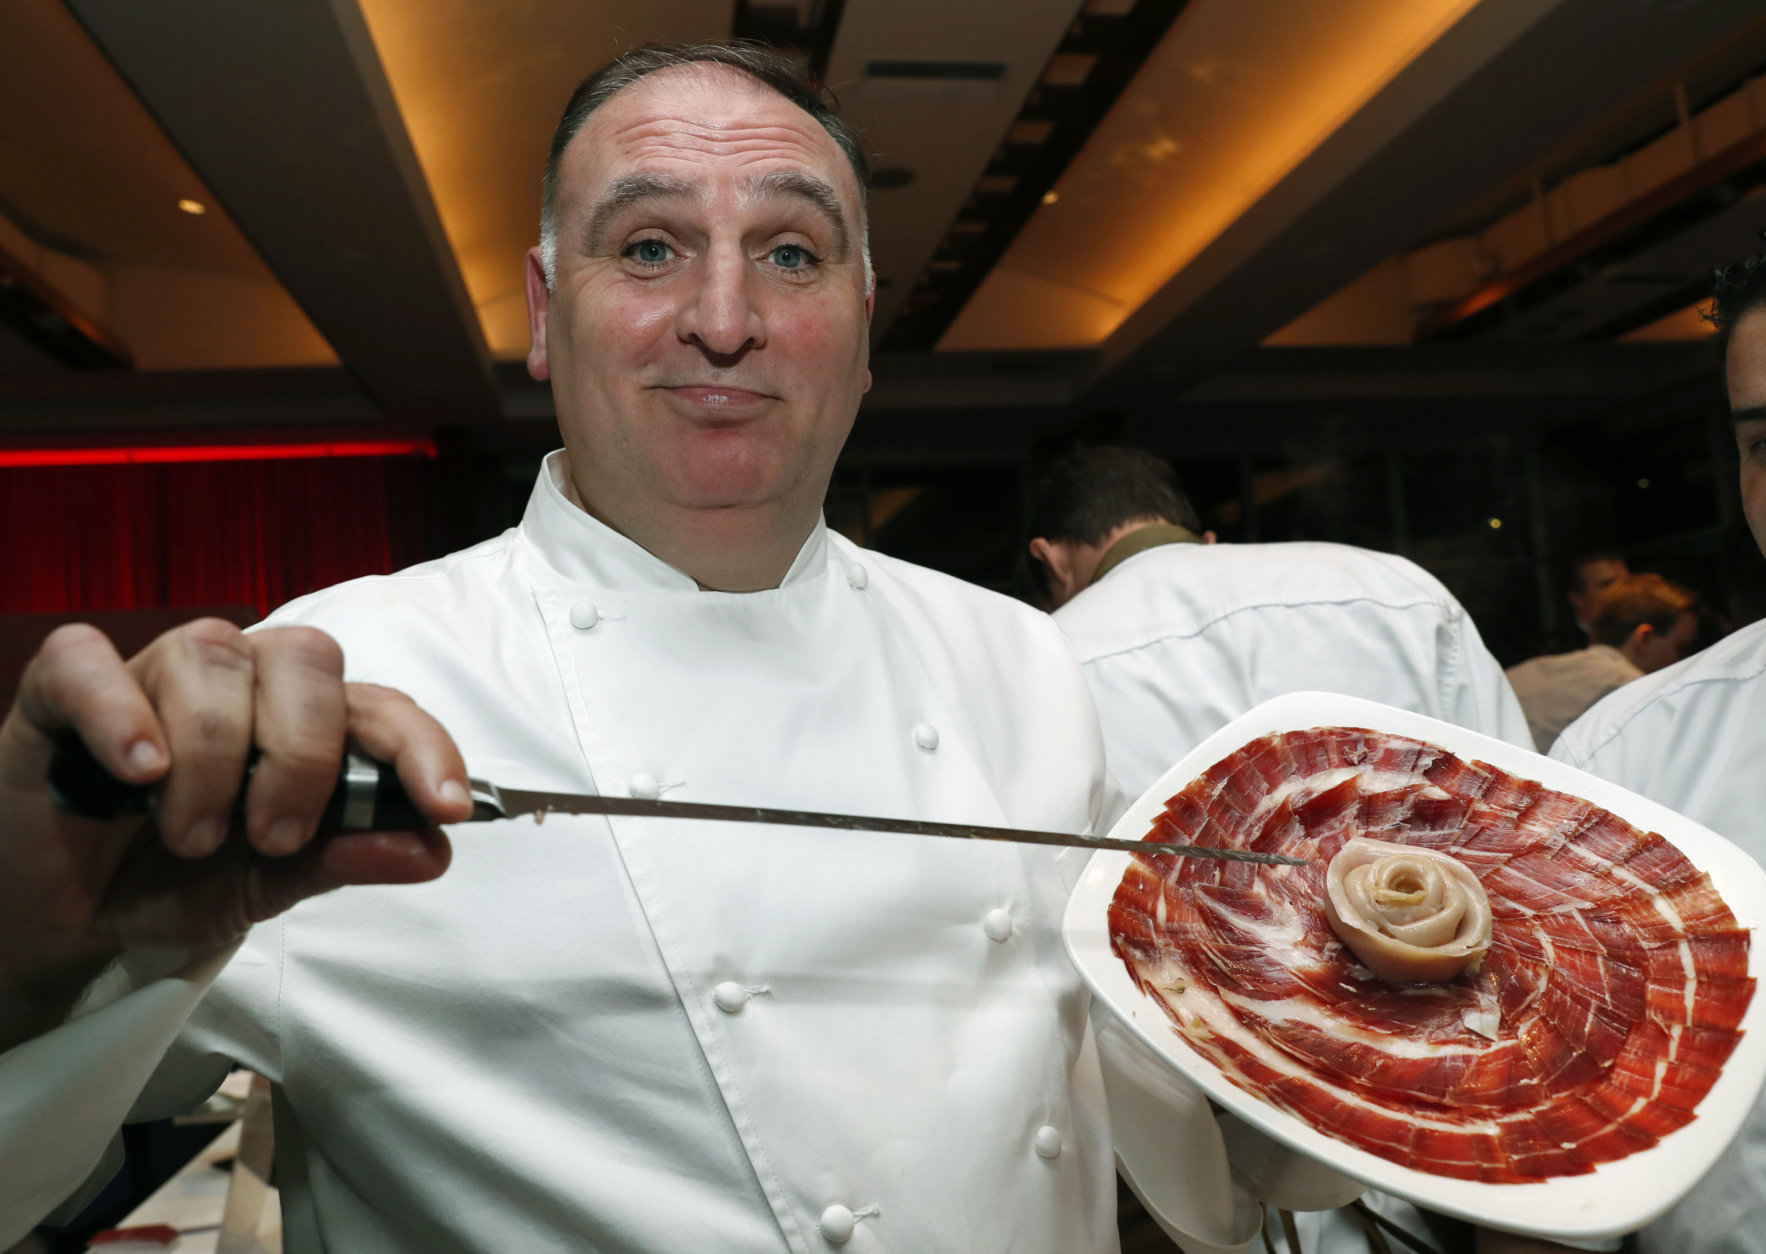 Spanish chef Jose Andres displays 48-month cured ham from acorn-fed, free-range, black-footed Iberico pigs from Spain at his ThinkFoodGroup station, Tuesday, Feb. 27, 2018, during the Careers through Culinary Arts Program (C-CAP) annual benefit in New York. Andres was honored with the C-CAP Honors award, which is granted to individuals within the culinary industry for exceptional leadership and achievements. (AP Photo/Kathy Willens)